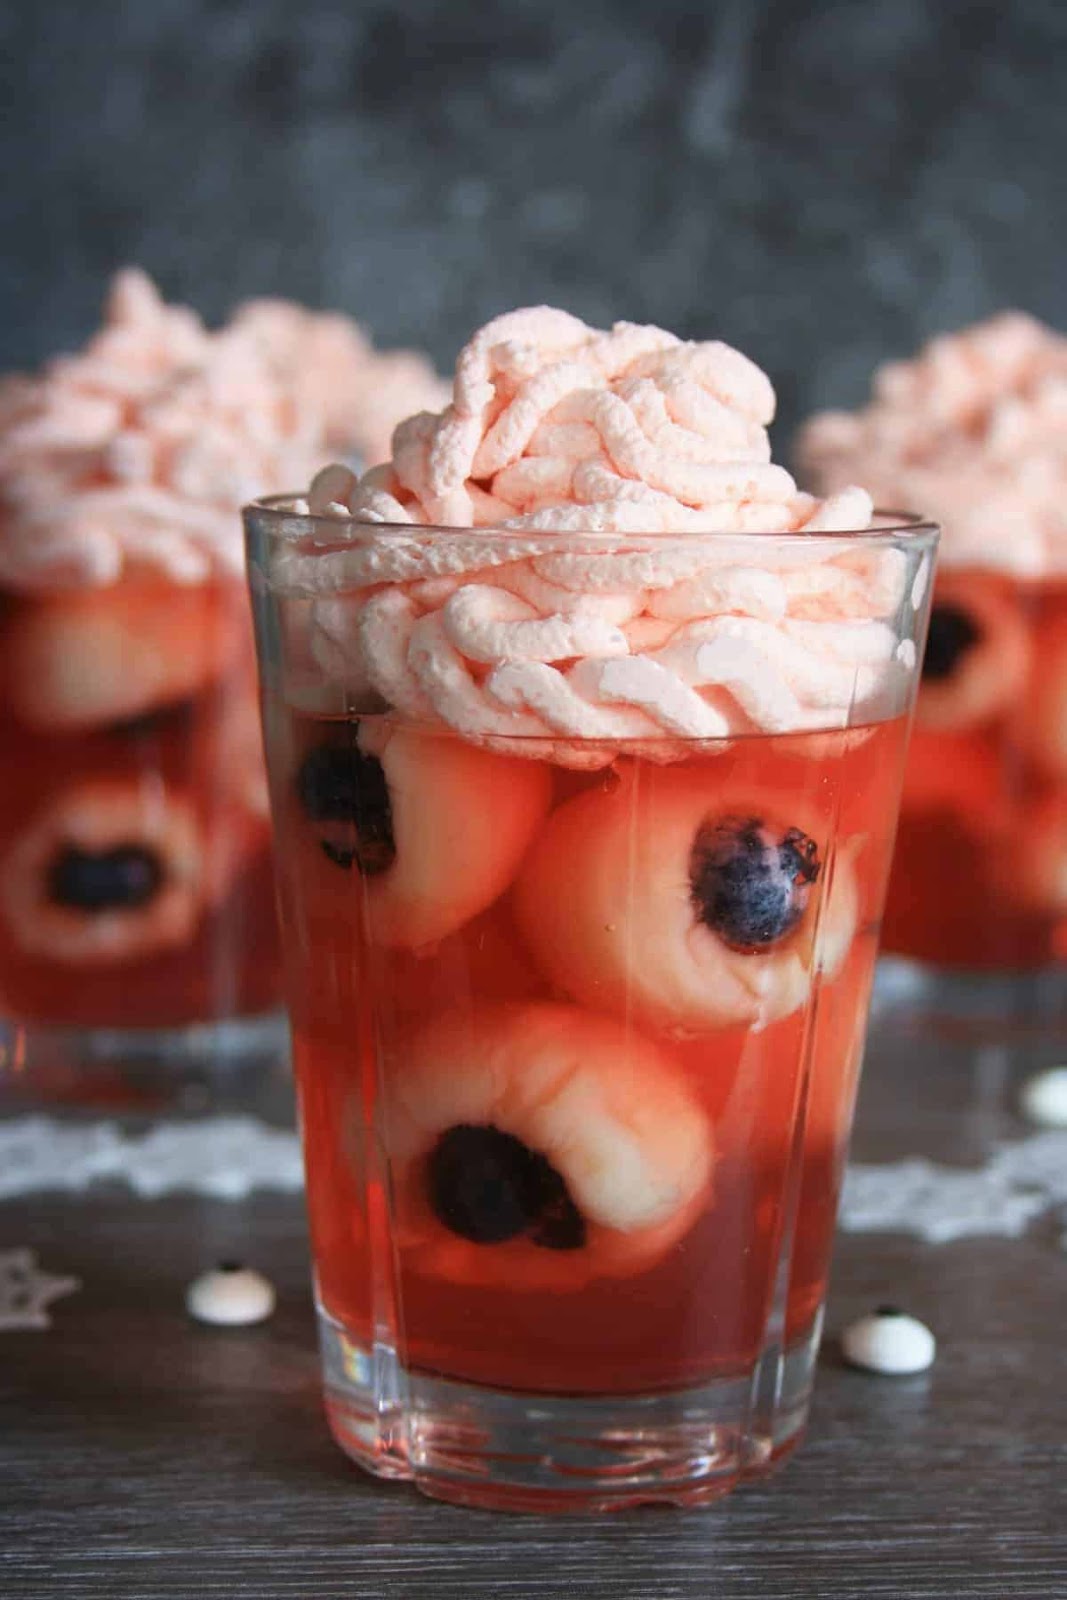 Jelly eyeballs as healthy Halloween desserts, displayed in a glass with whipped cream on top.